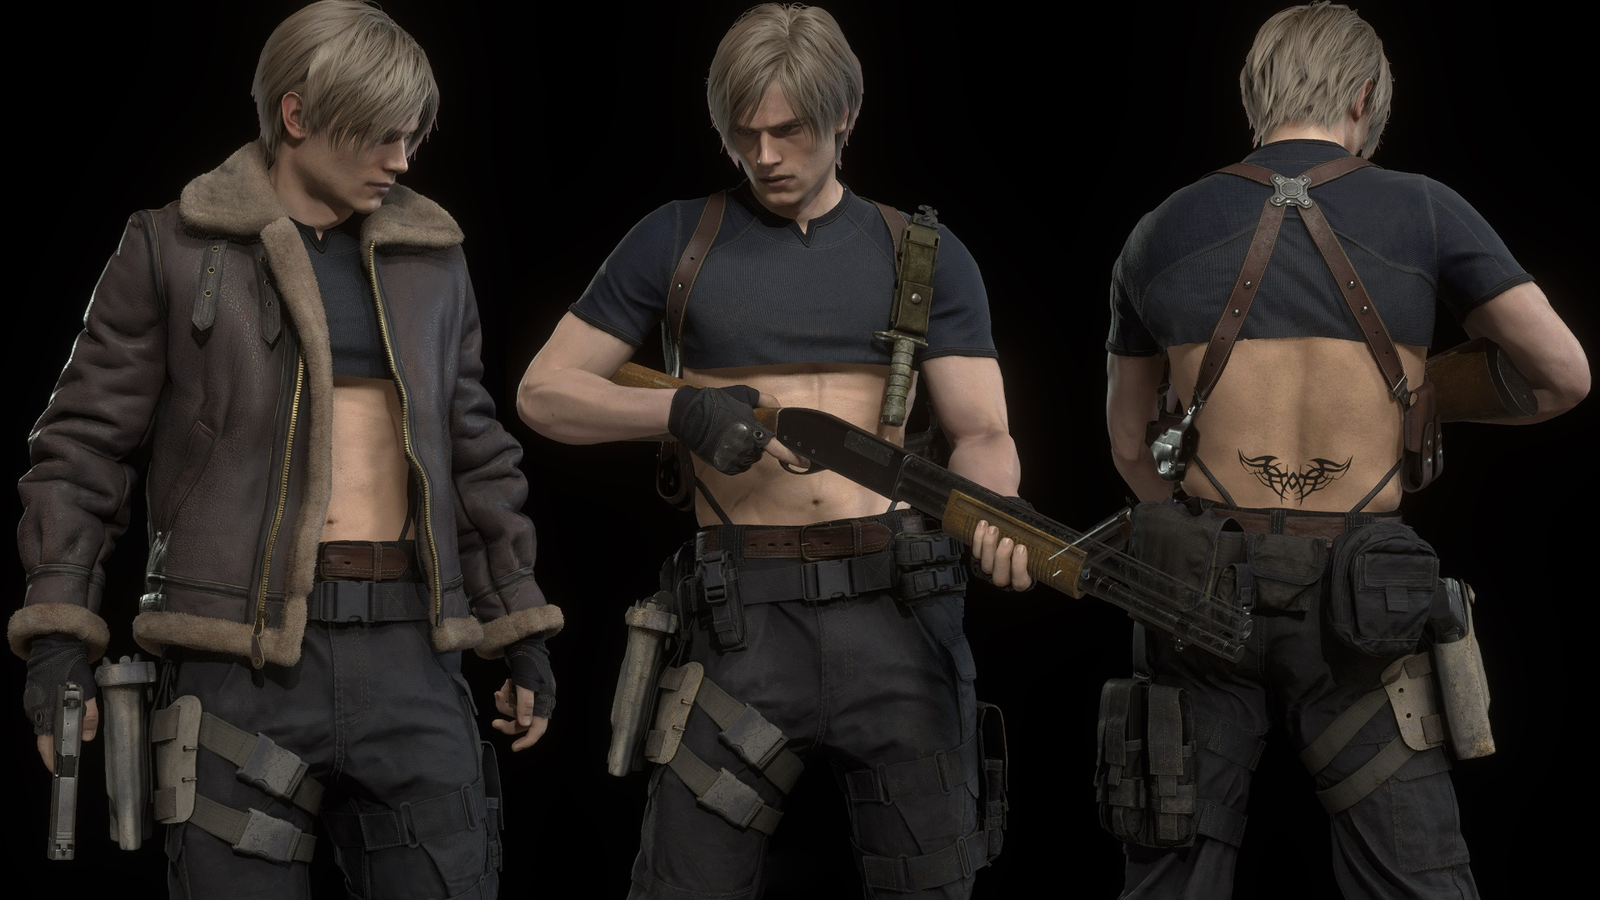 Resident Evil 4 Fans Keep Drawing Ashley as a Tiny Mouse, and It's Adorable